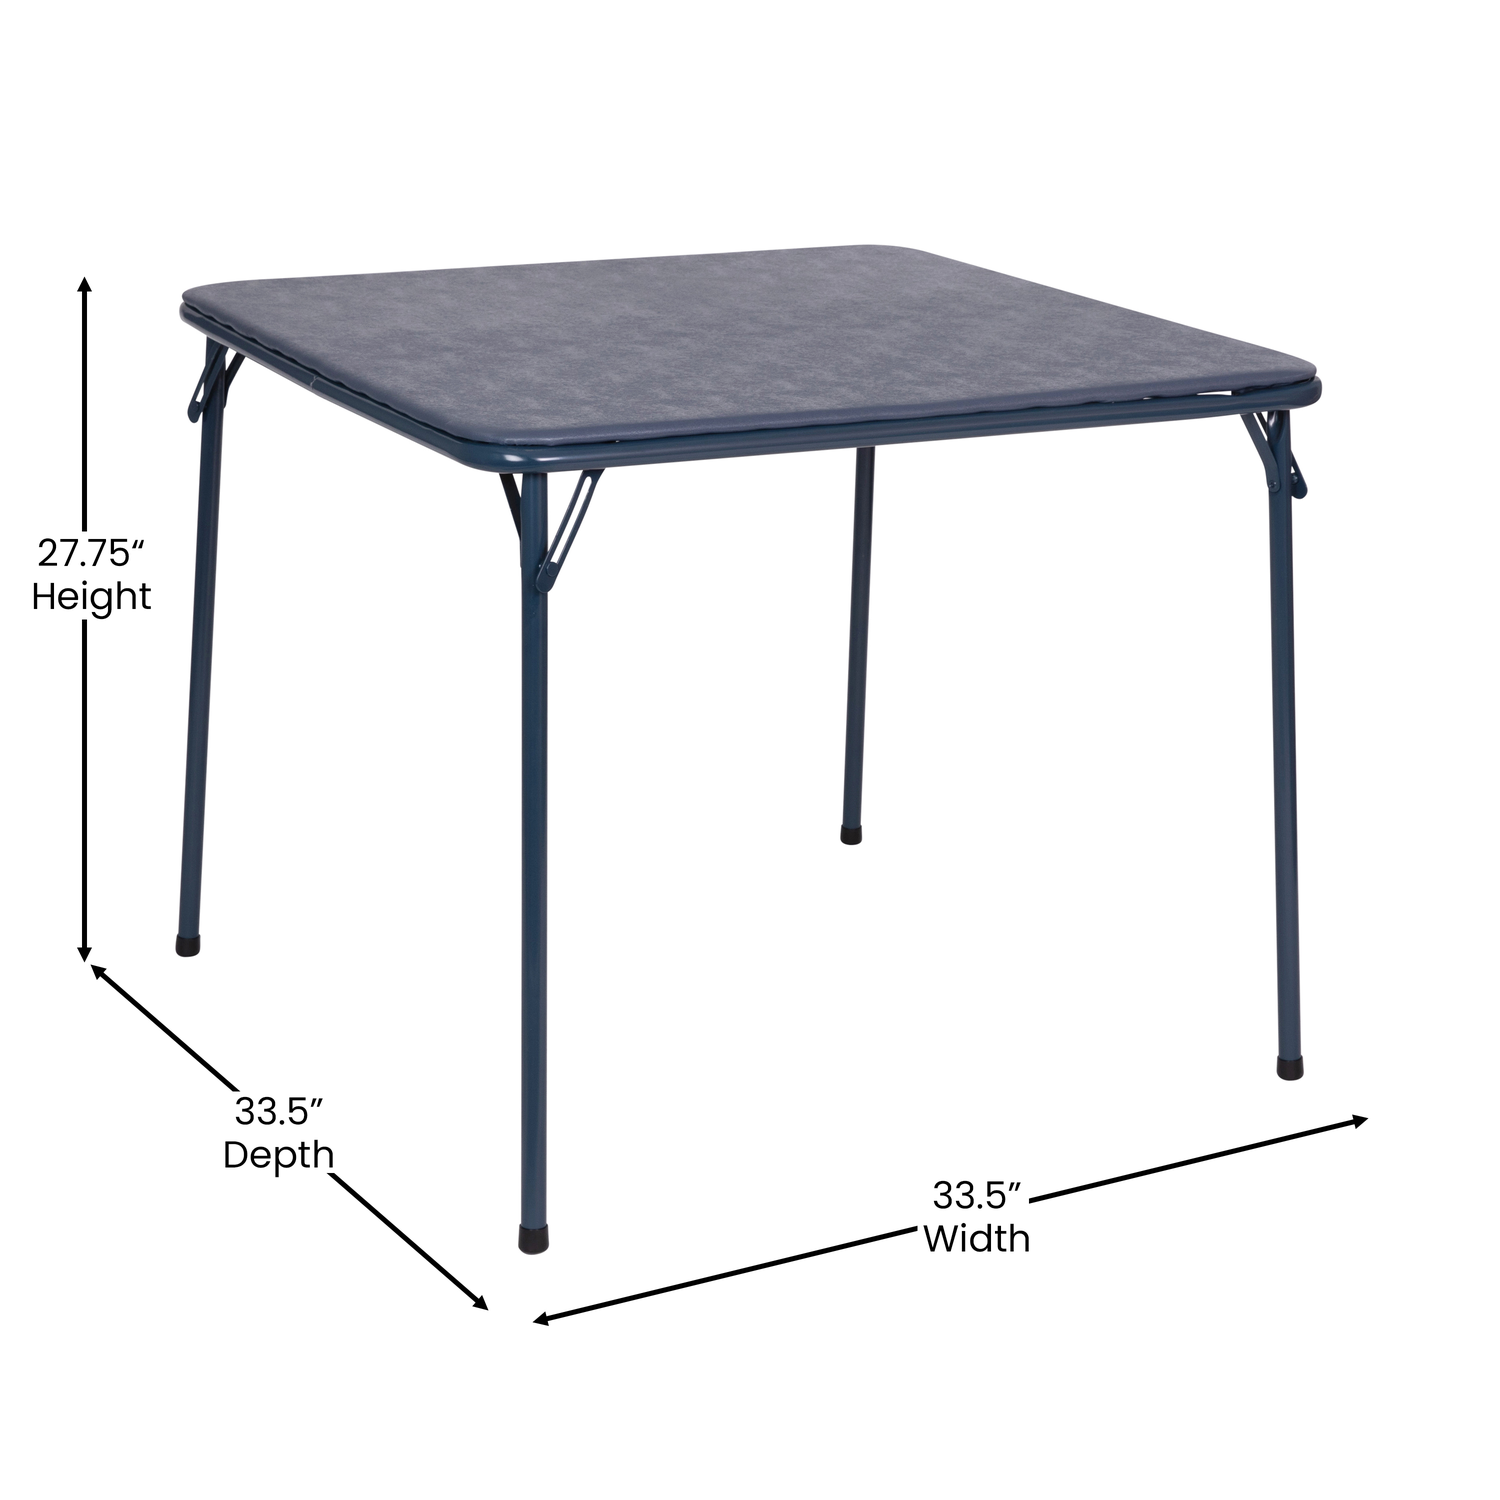 5 Piece Navy Folding Card Table and Chair Set